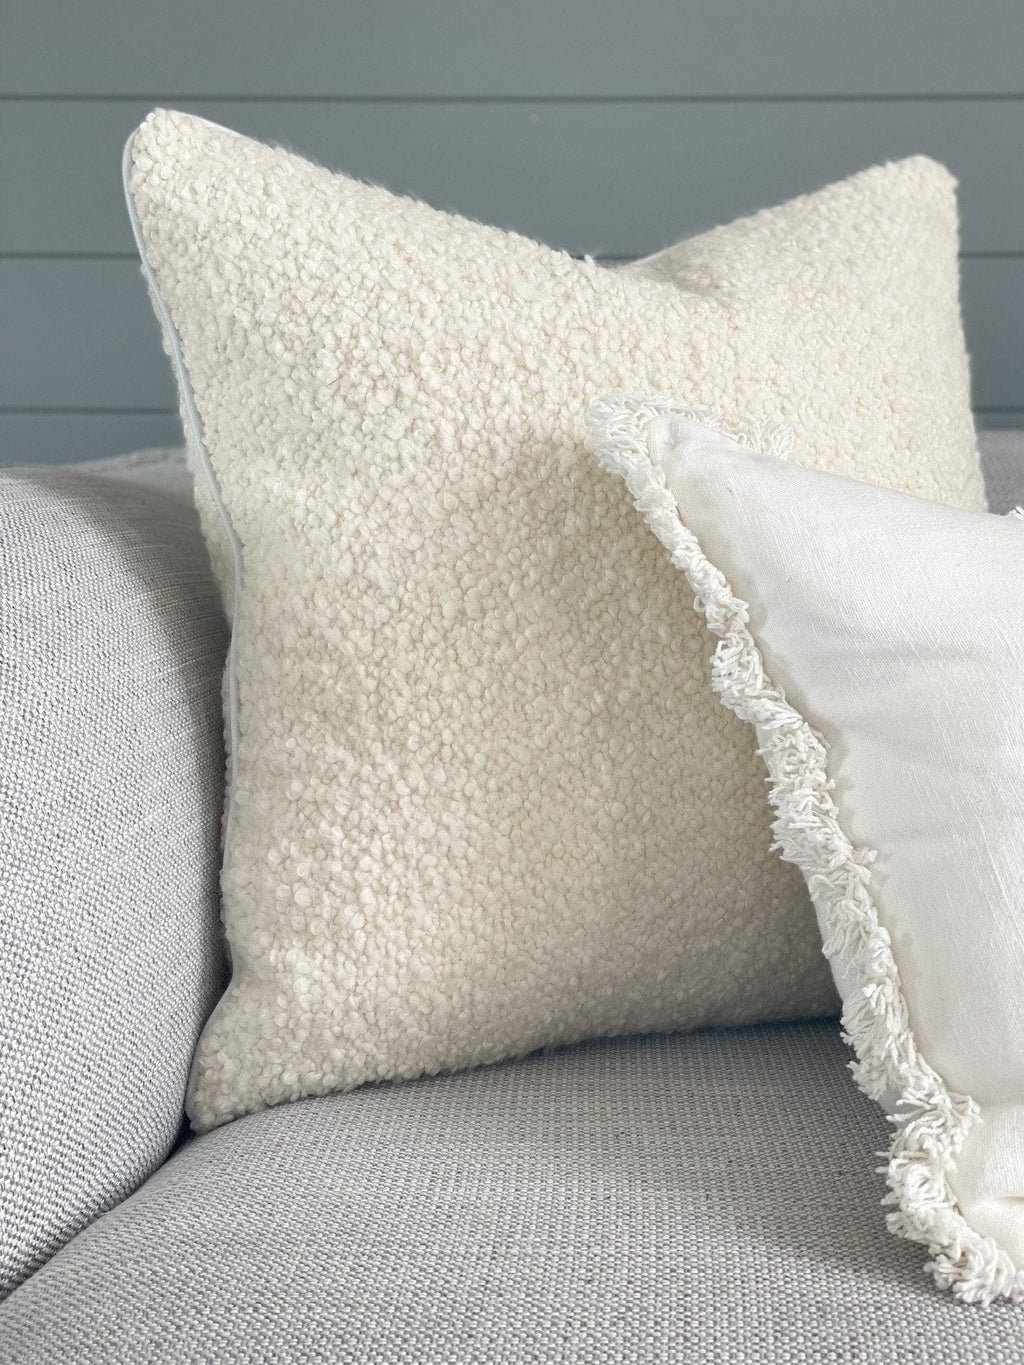 norsu Cushion, Bouclé Ivory with White Leather Piping - Norsu Interiors (6289976295612)